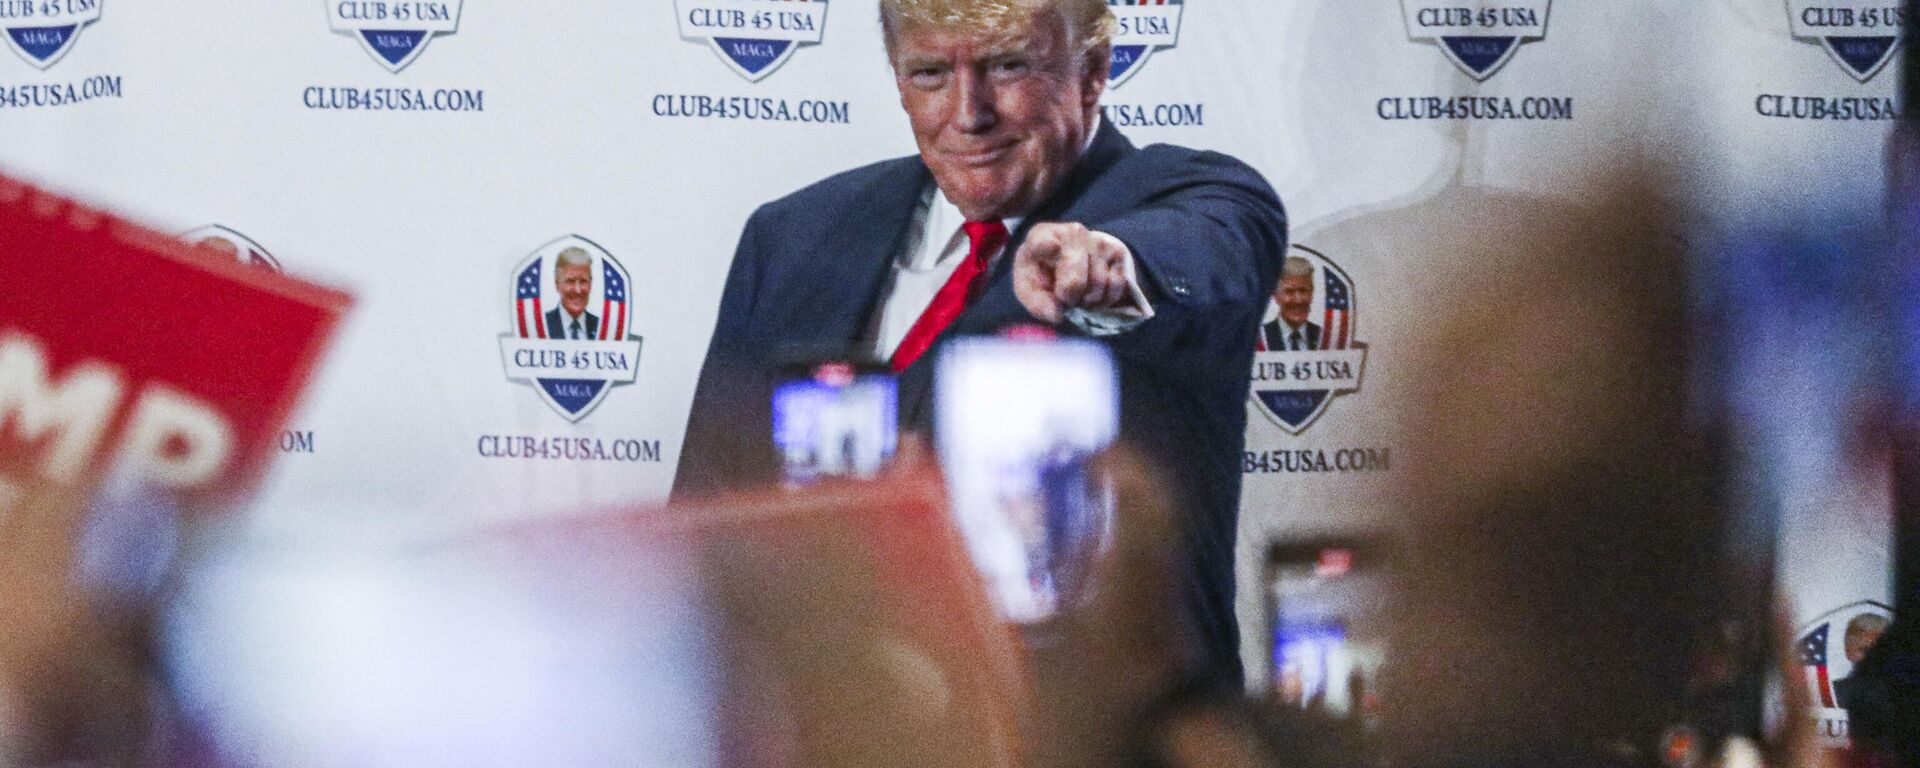 Former US President Donald Trump gestures to supporters during Trump's President Day event at the Hilton Palm Beach Airport in West Palm Beach, Florida, on February 20, 2023 - Sputnik International, 1920, 21.03.2023